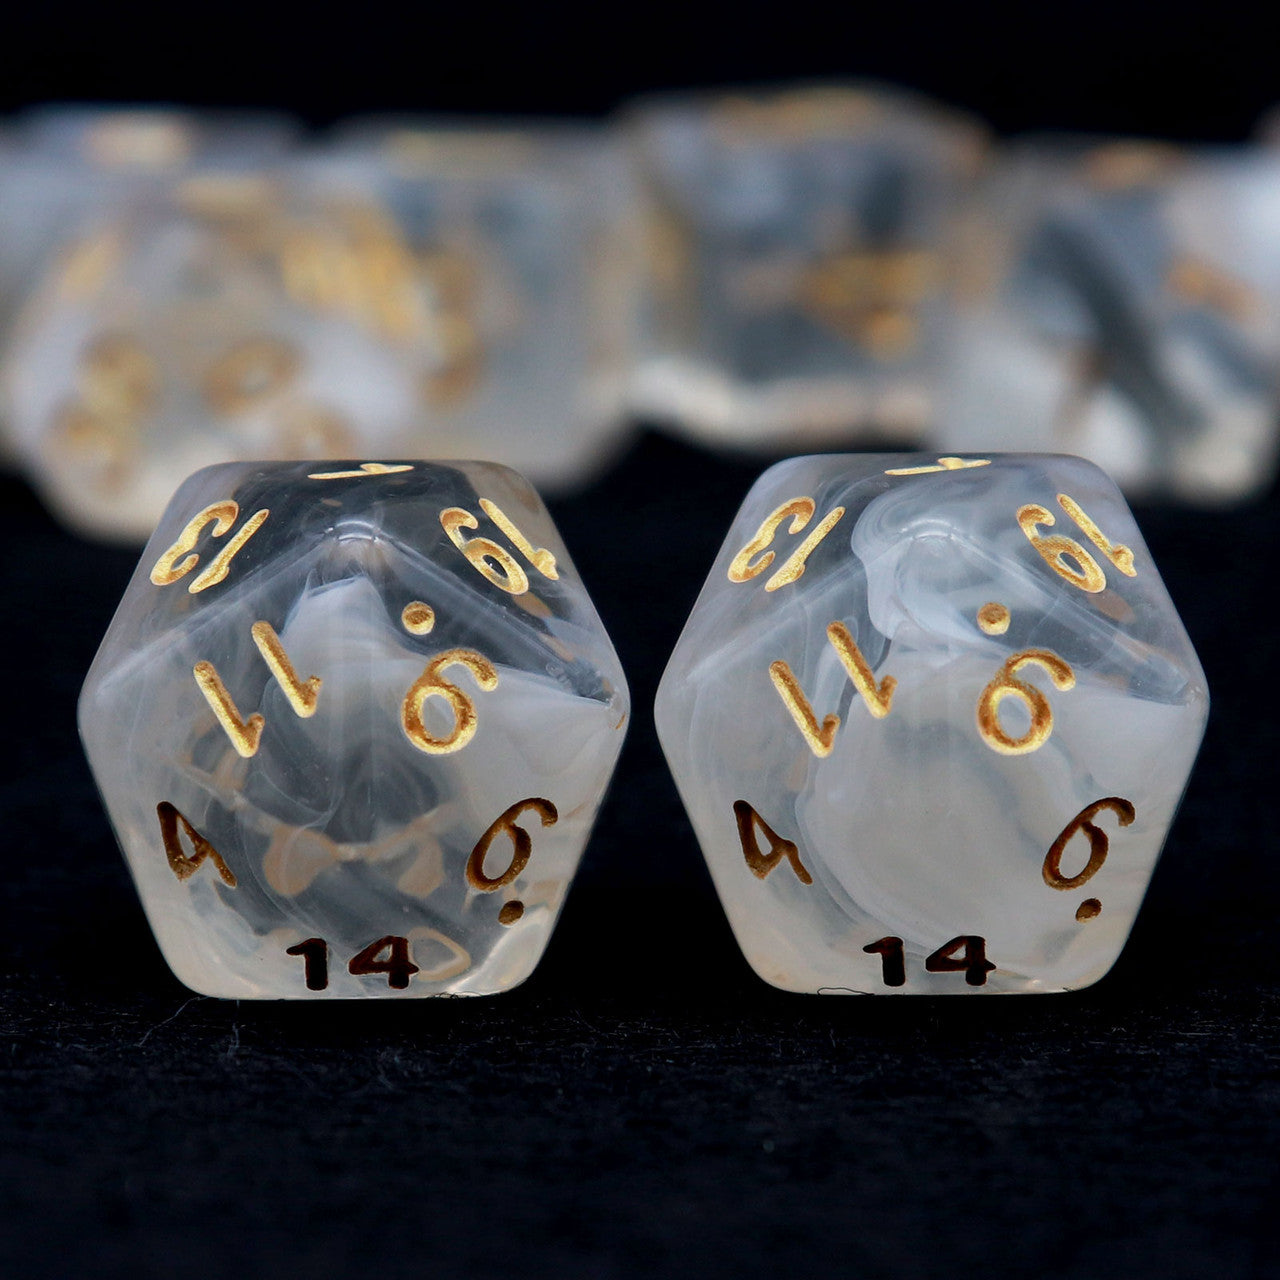 11PCS DND Dice Set Polyhedral D&D Dice for RPGs-White Cloud-Gold Numbers